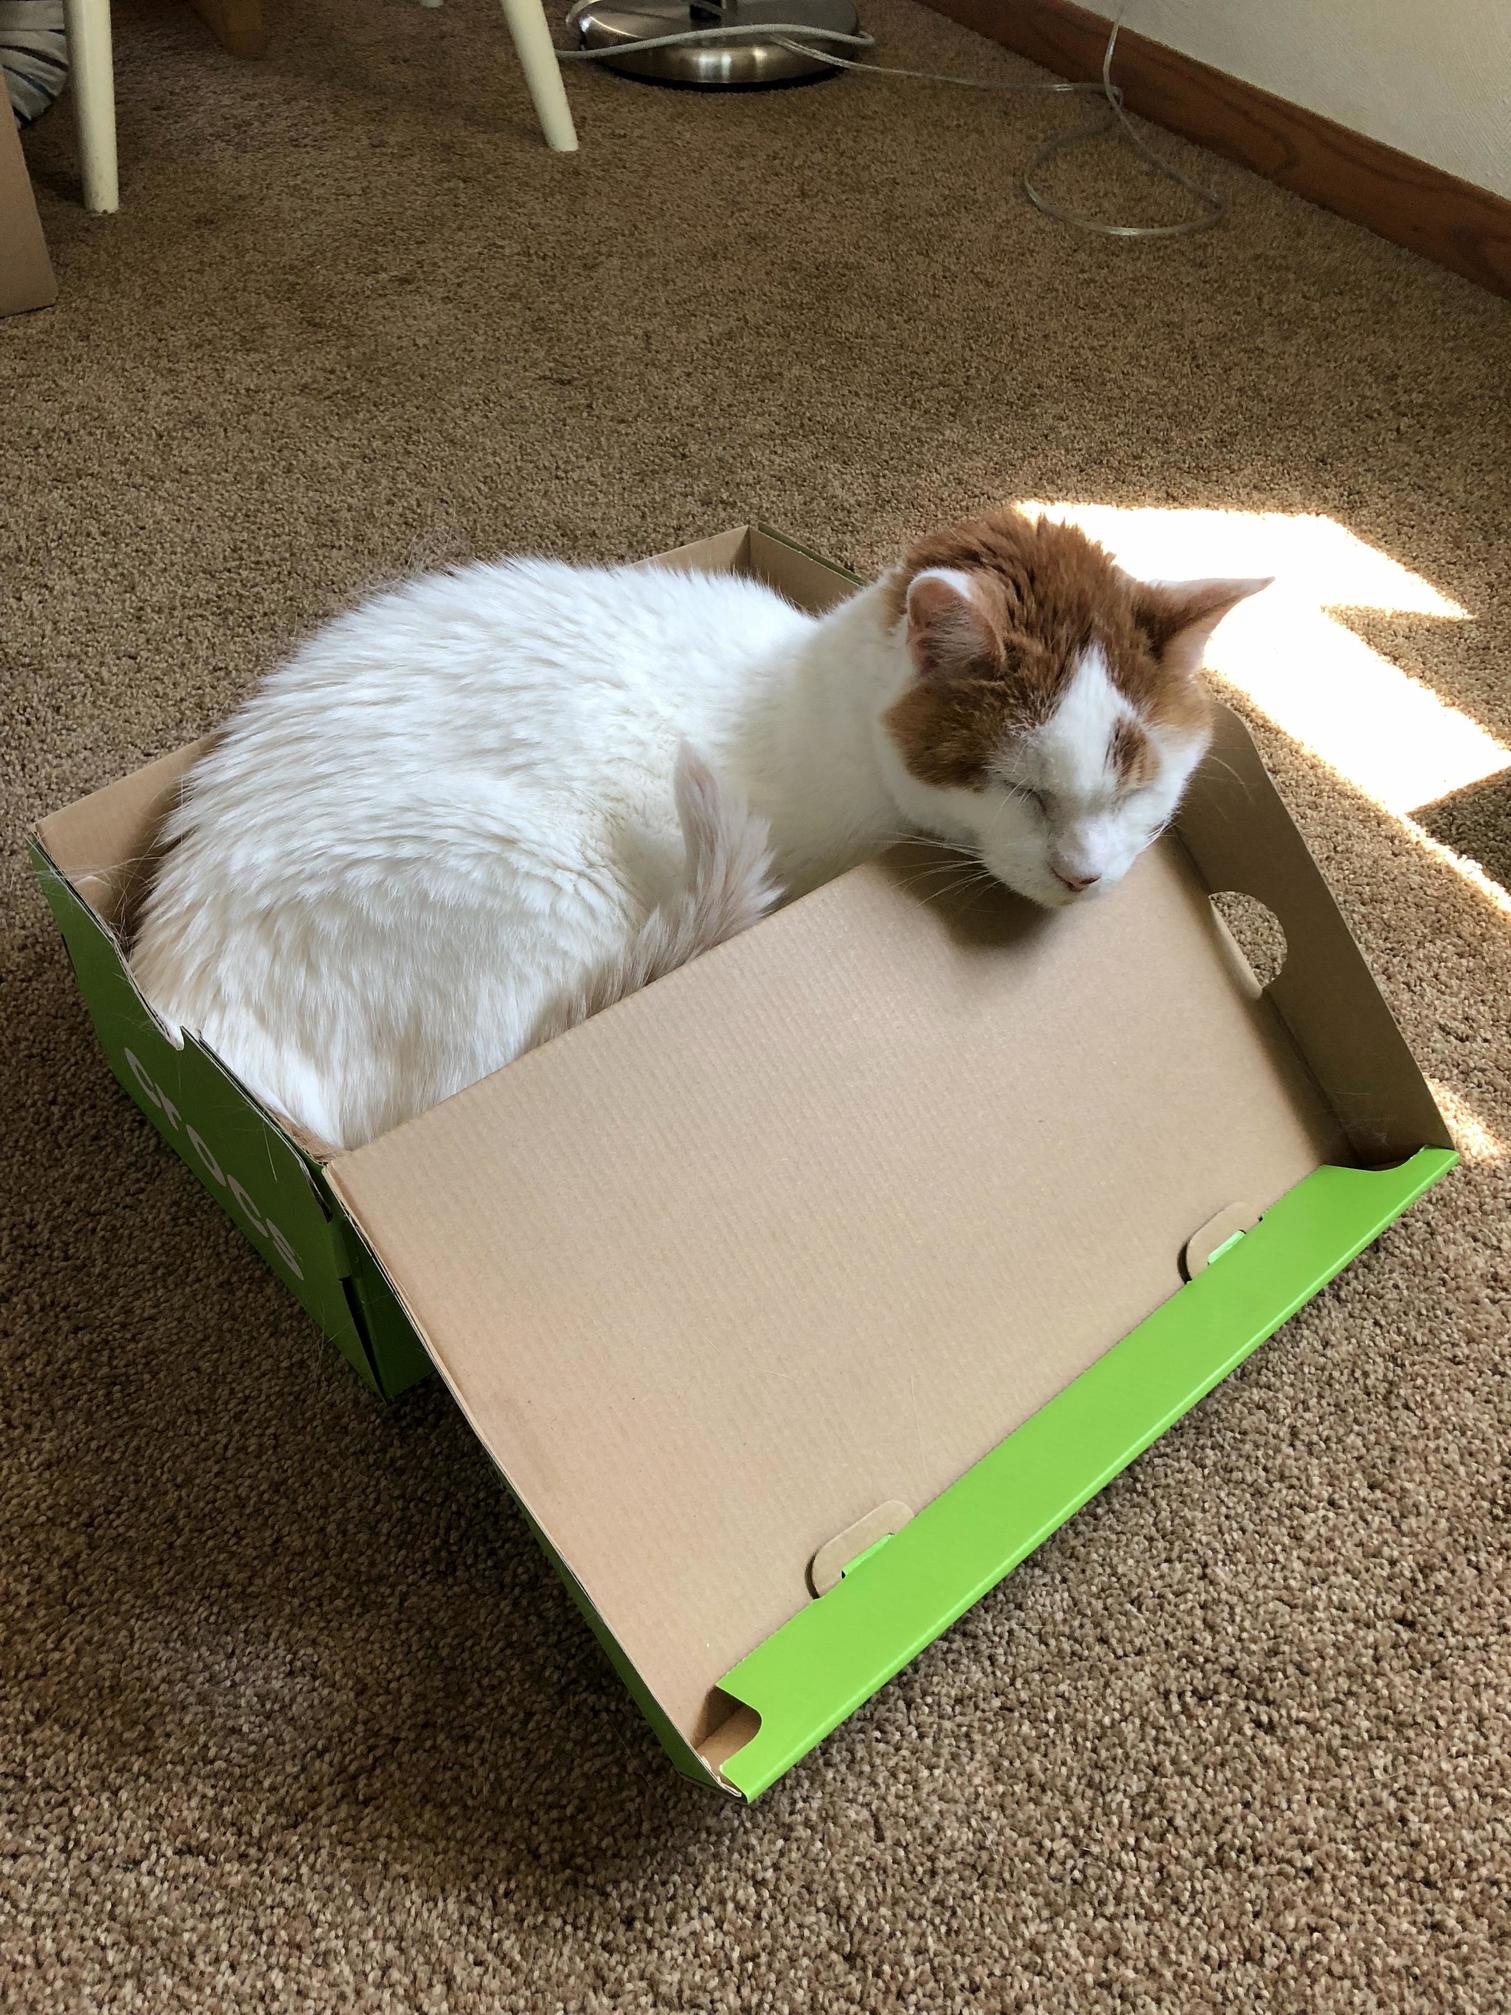 No clue how my 14 pound cat fit himself into a shoebox, but here he is